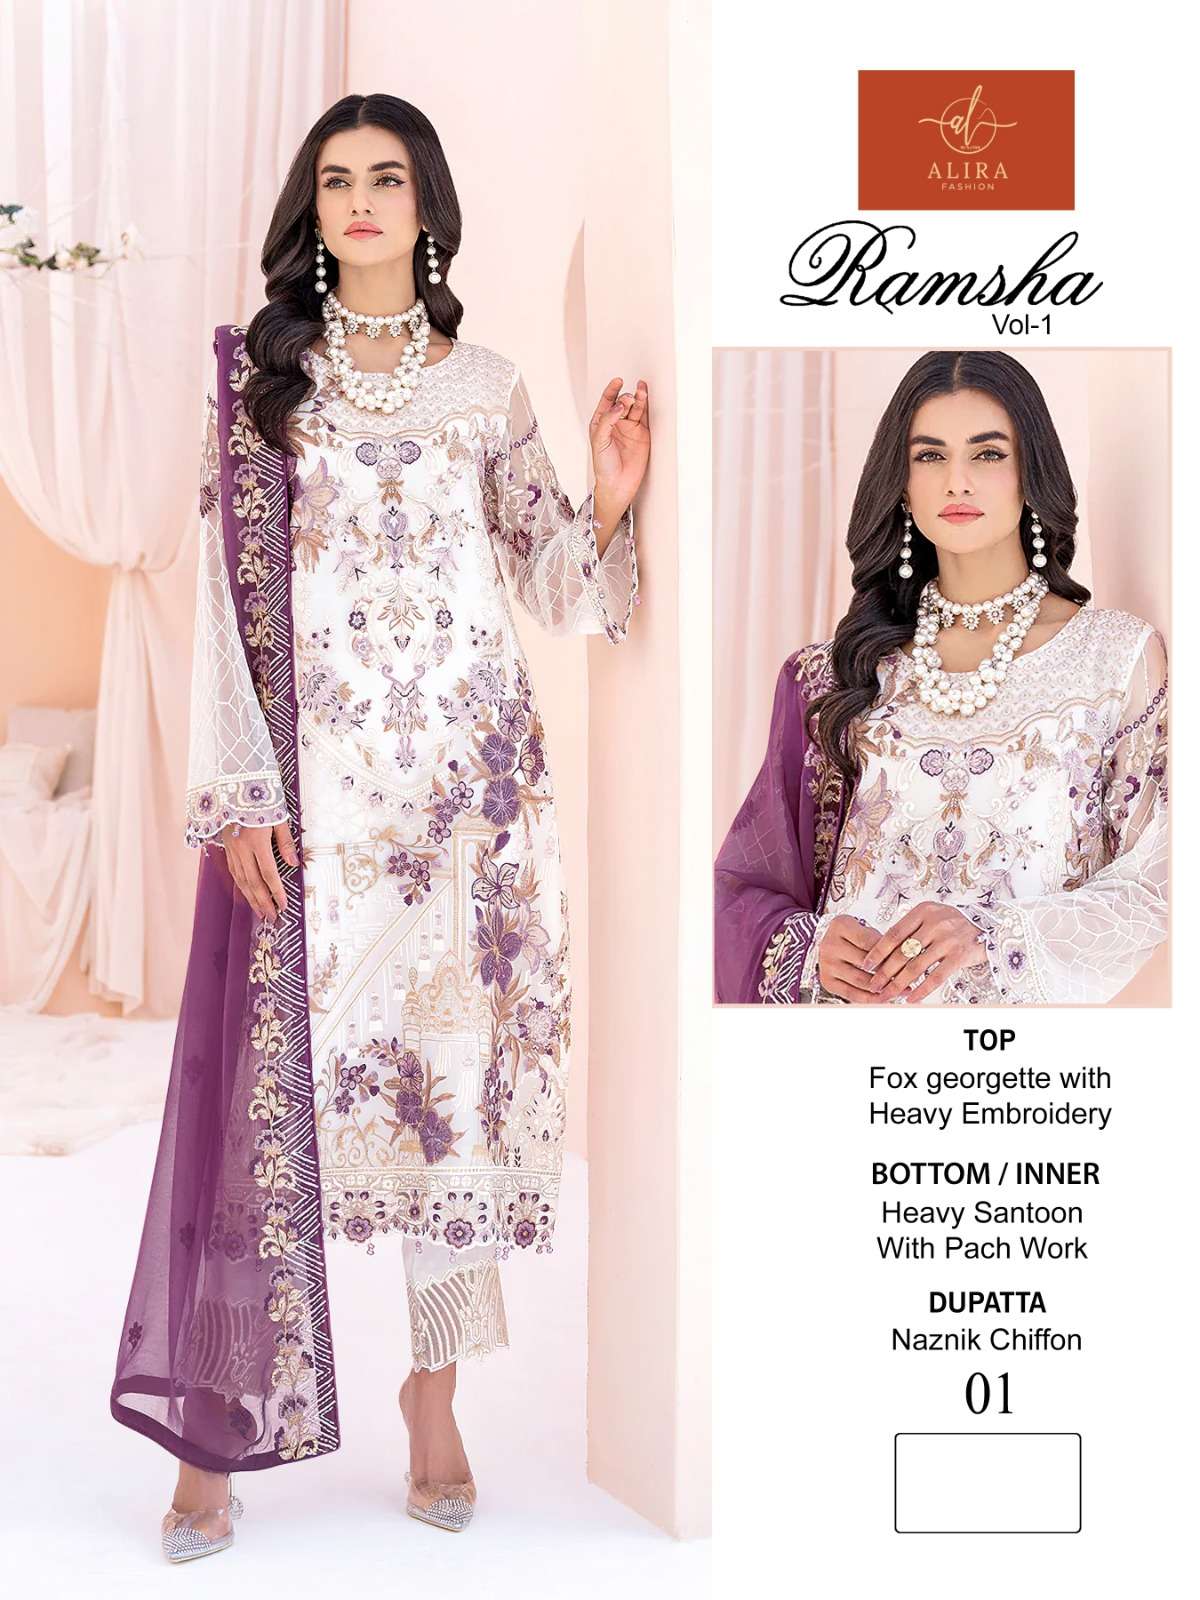 Ramsha Vol-1 By Alira 01 To 03 Series Beautiful Pakistani Suits Colorful Stylish Fancy Casual Wear & Ethnic Wear Faux Georgette Embroidered Dresses At Wholesale Price